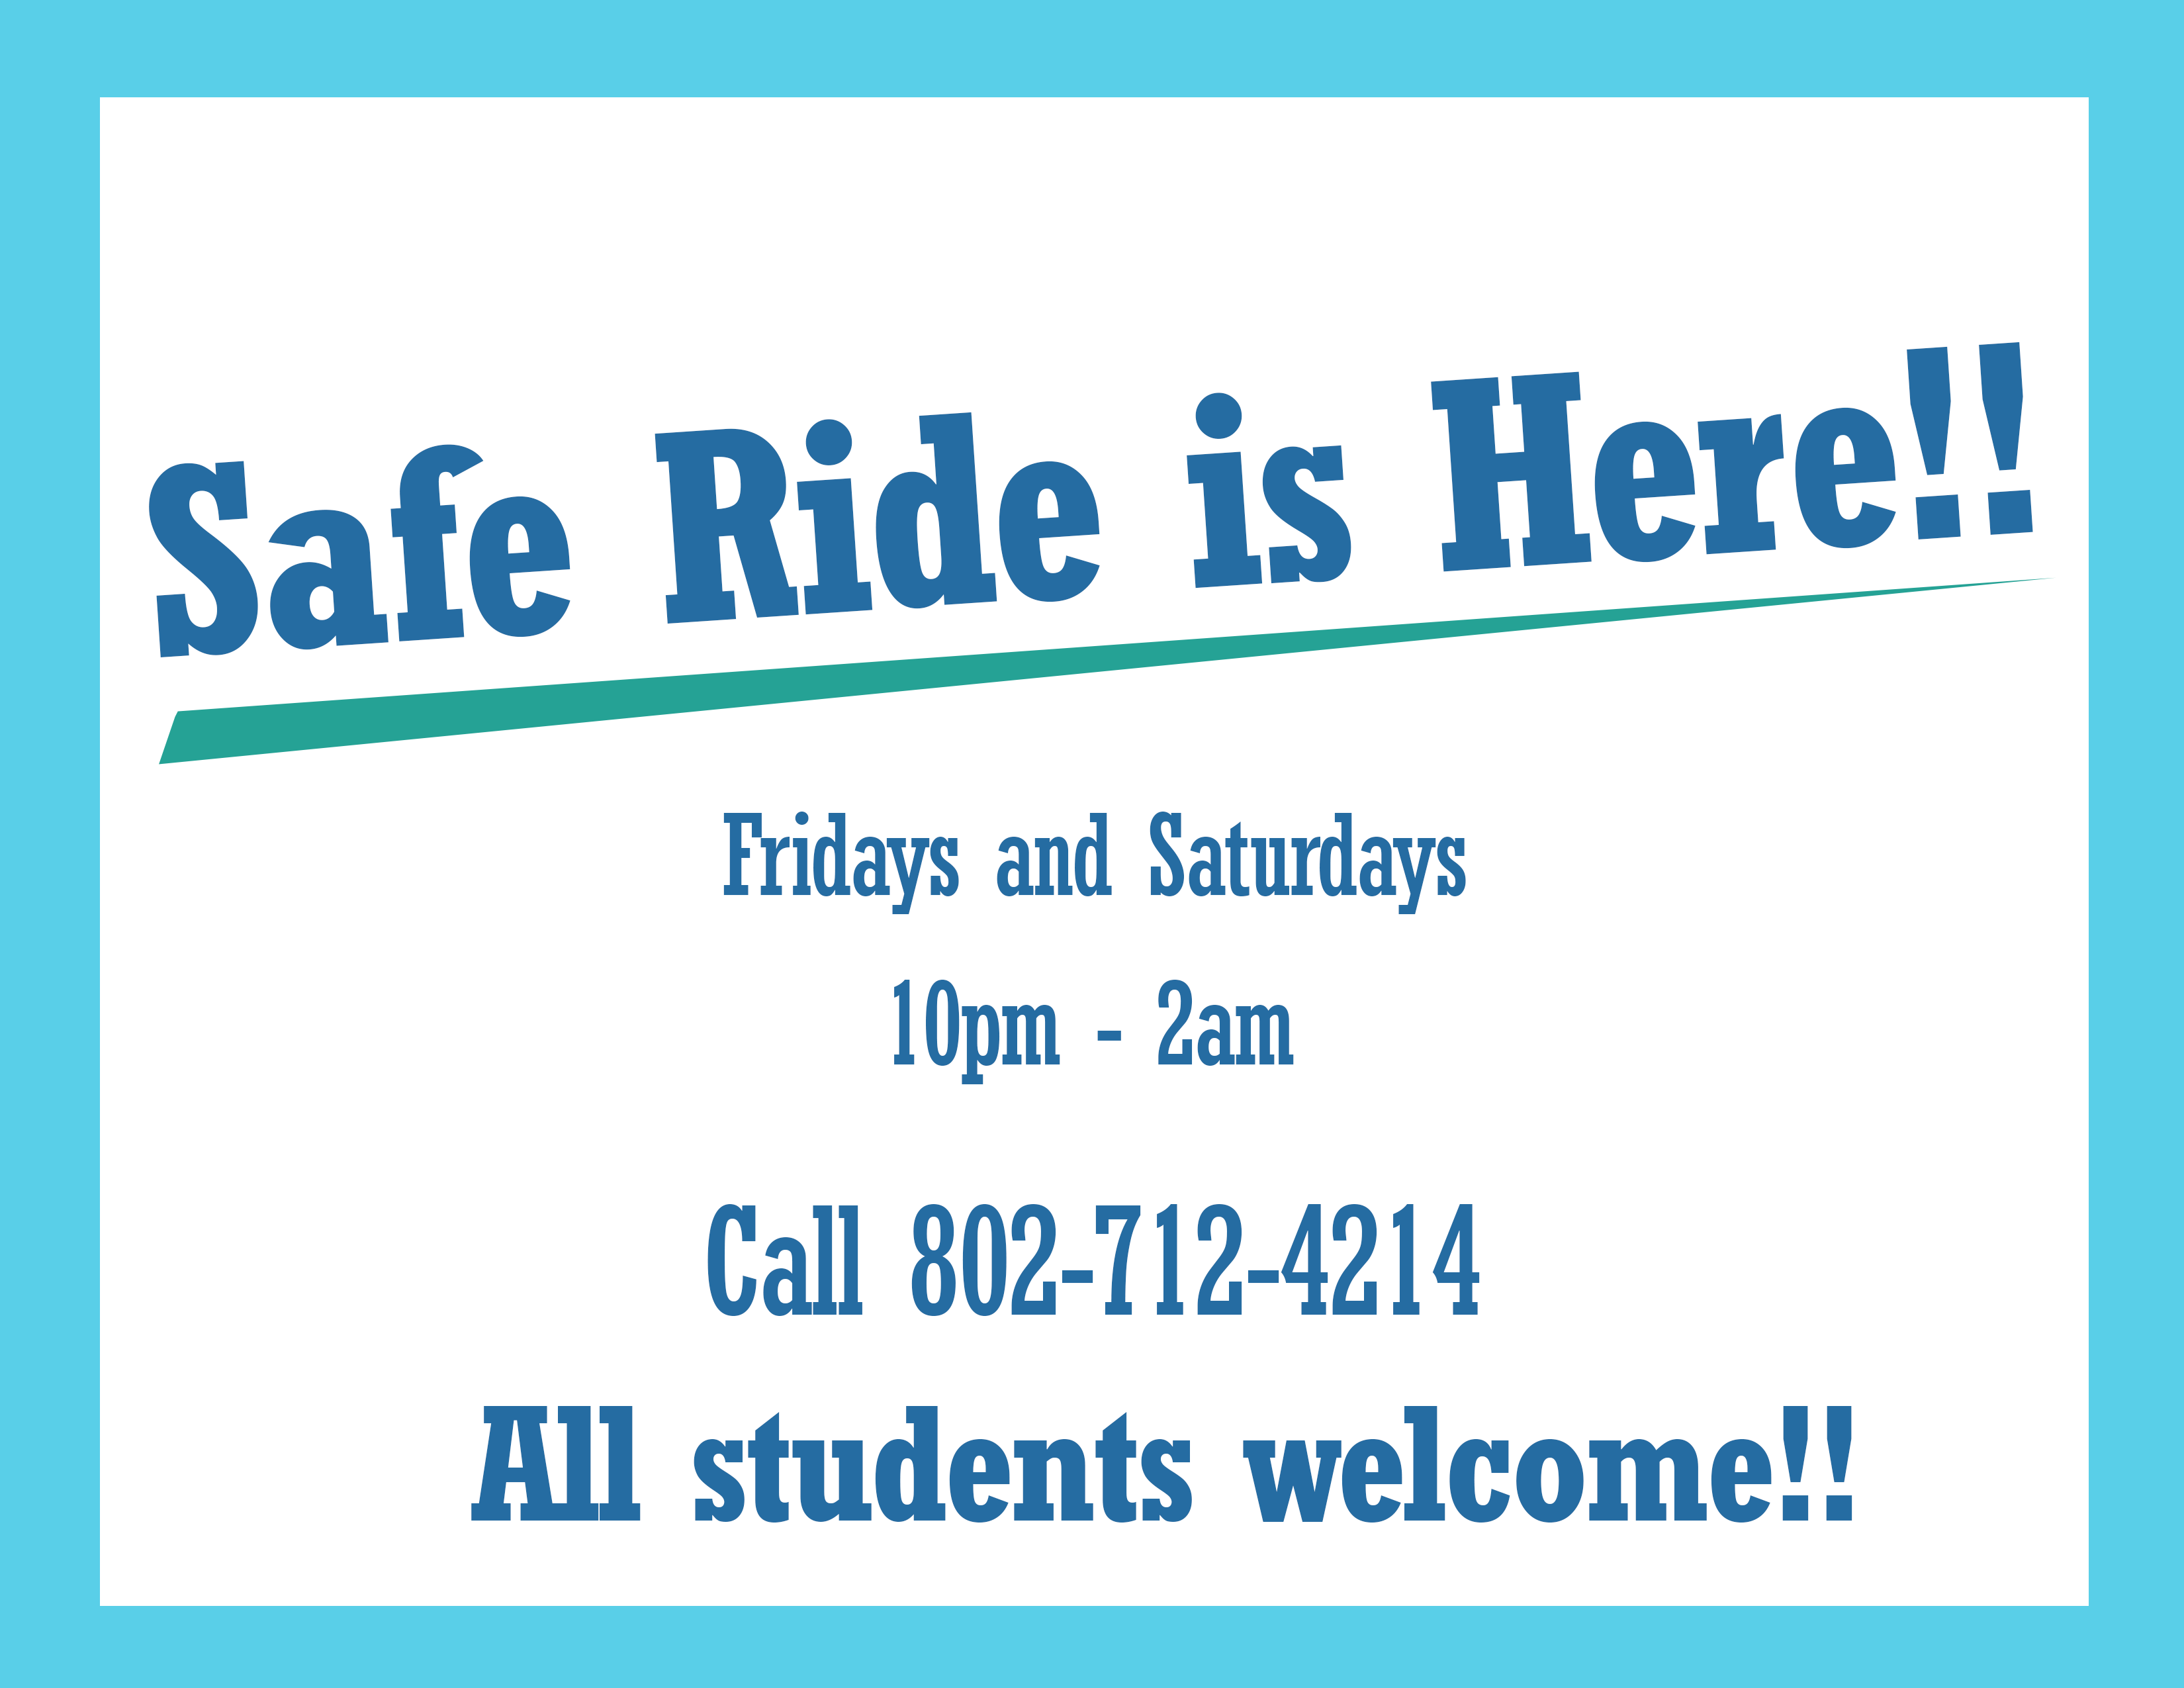 Safe Ride is Here!